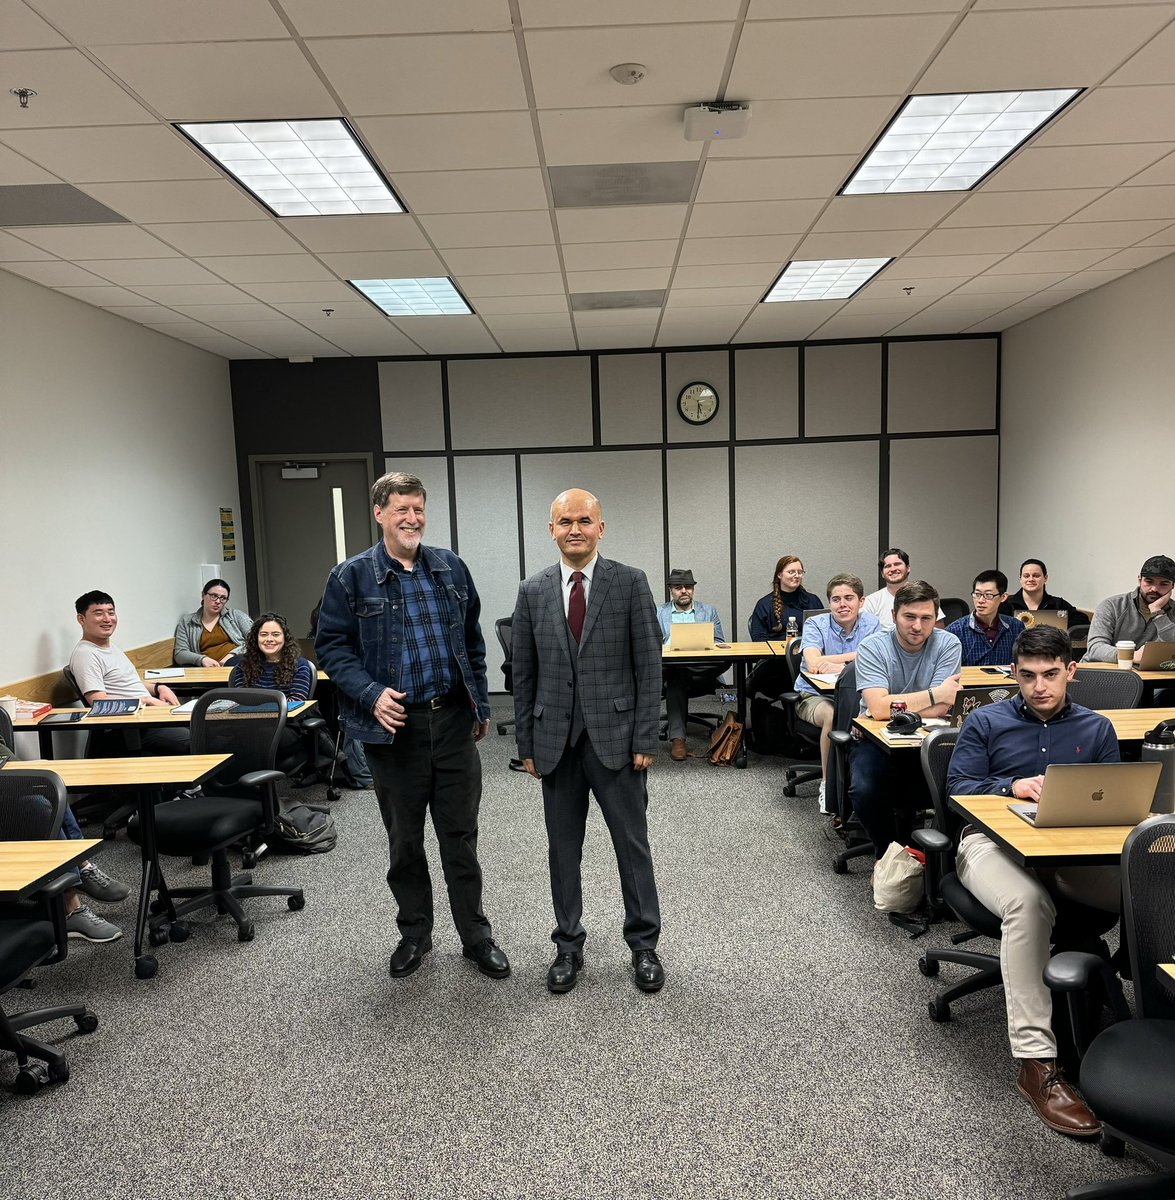 Thrilled to engage with graduate students at George Mason University Schar School of Policy and Government, shedding light on #Russia's pivotal role in the MiddleEast.Highlighting energy dynamics with #Iran and #SaudiArabia. Gratitude to Prof @Mark_N_Katz for the warm invitation!